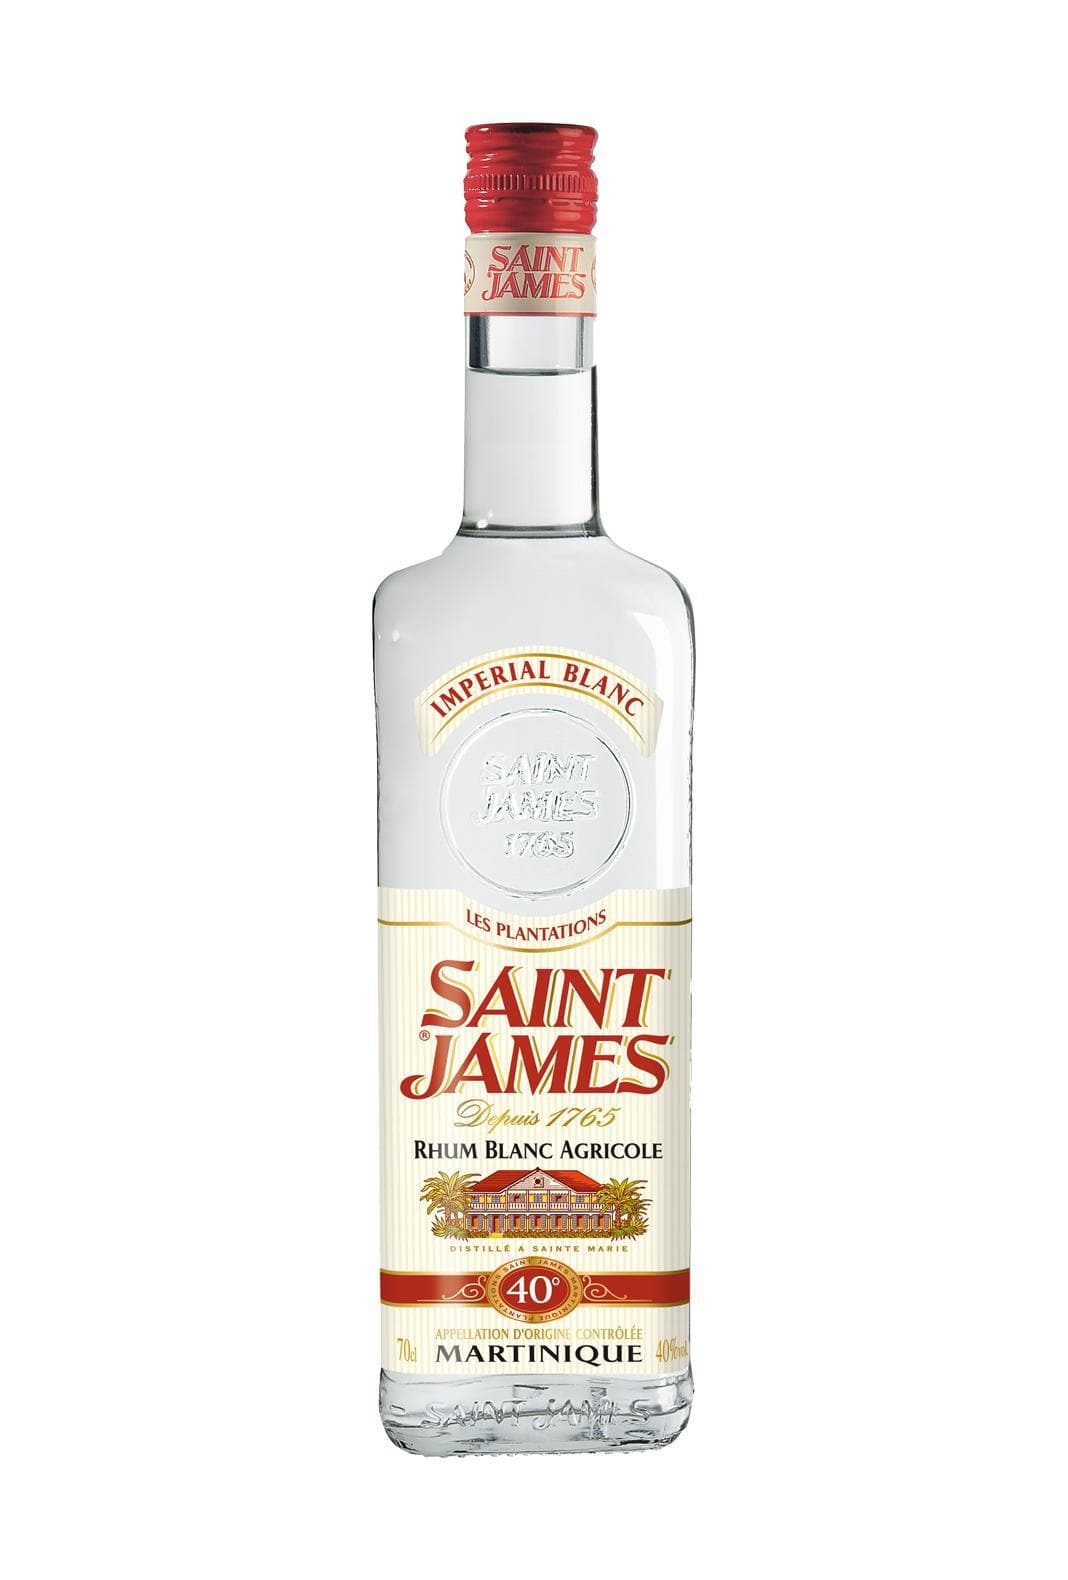 St James Rum Agricole Blanc (White) 40% 700ml | Rum | Shop online at Spirits of France